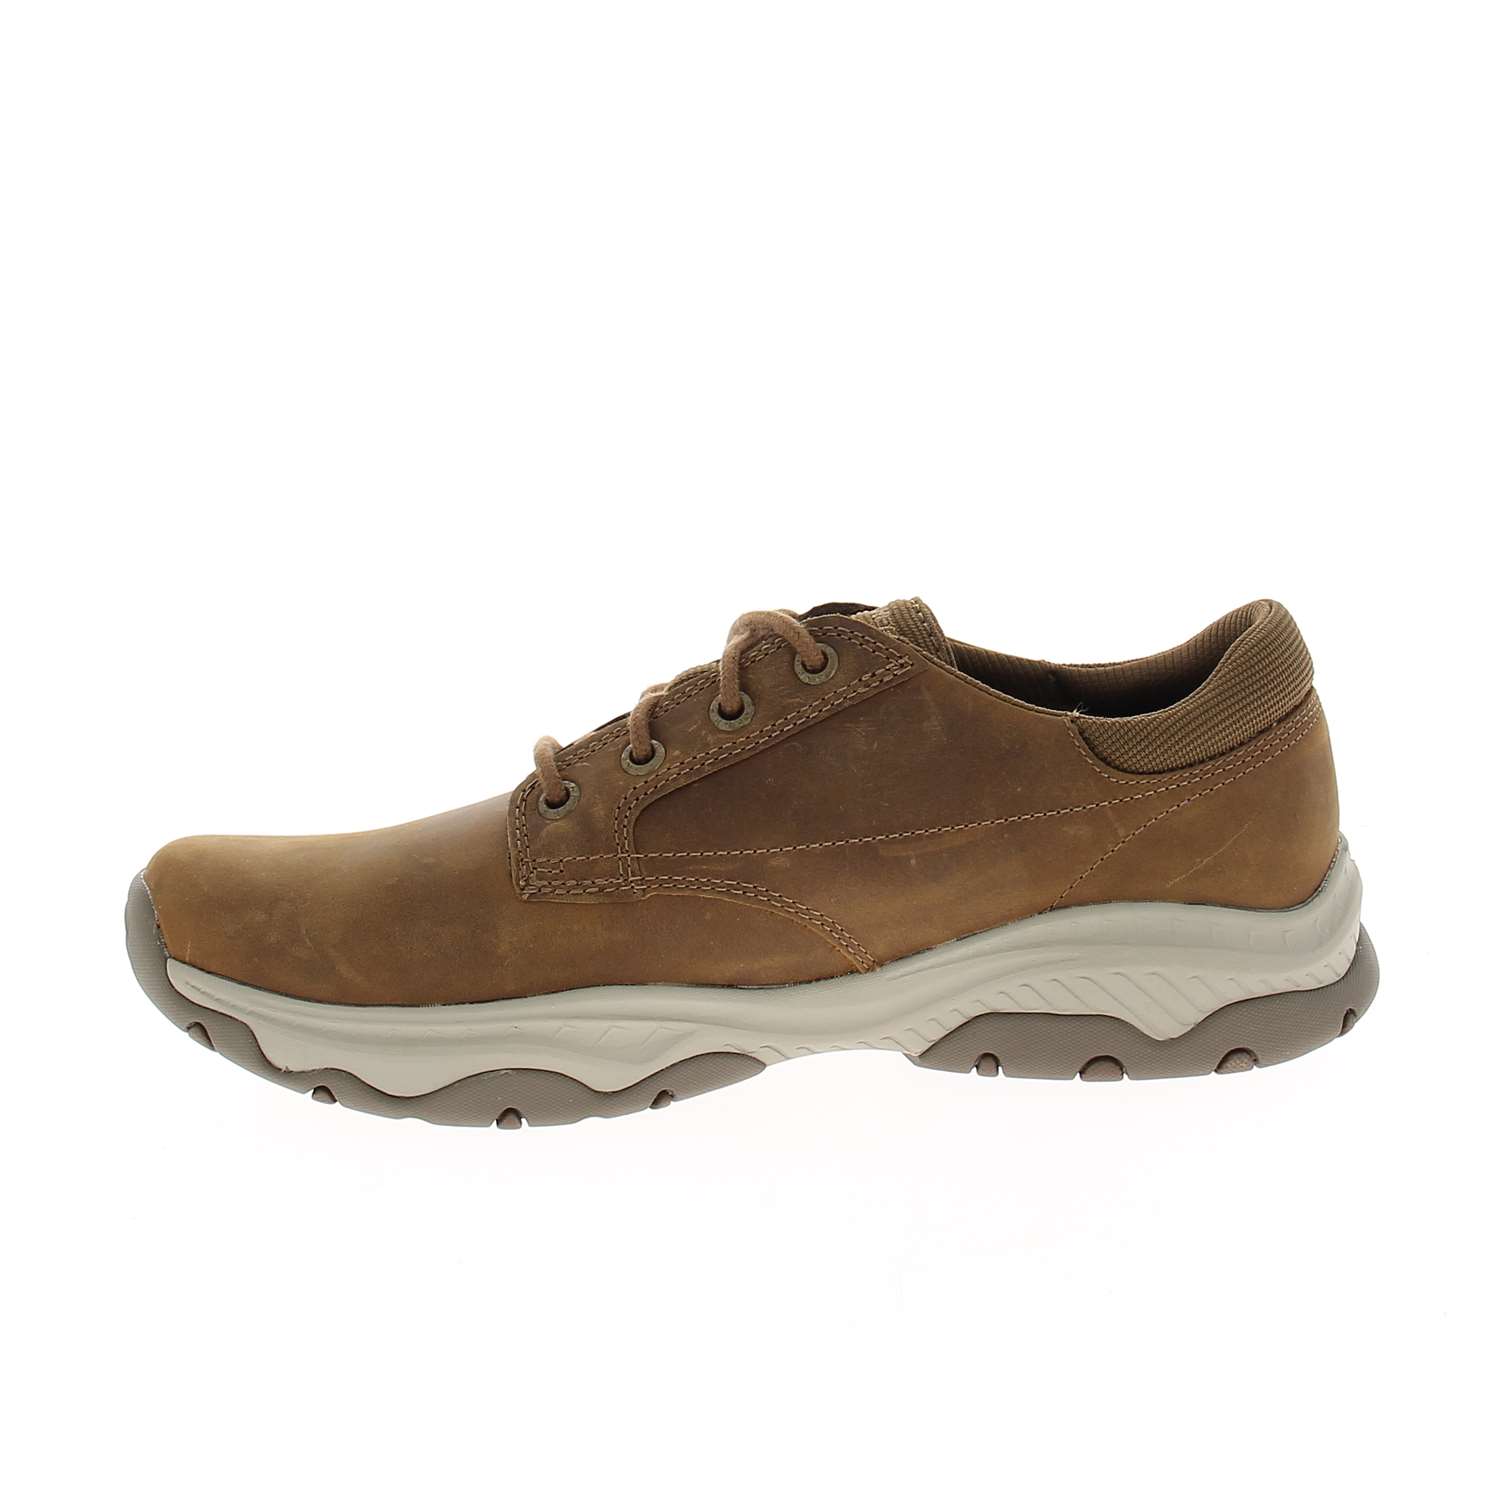 05 - CRASTER RELAXED FIT - SKECHERS - Chaussures à lacets - Nubuck